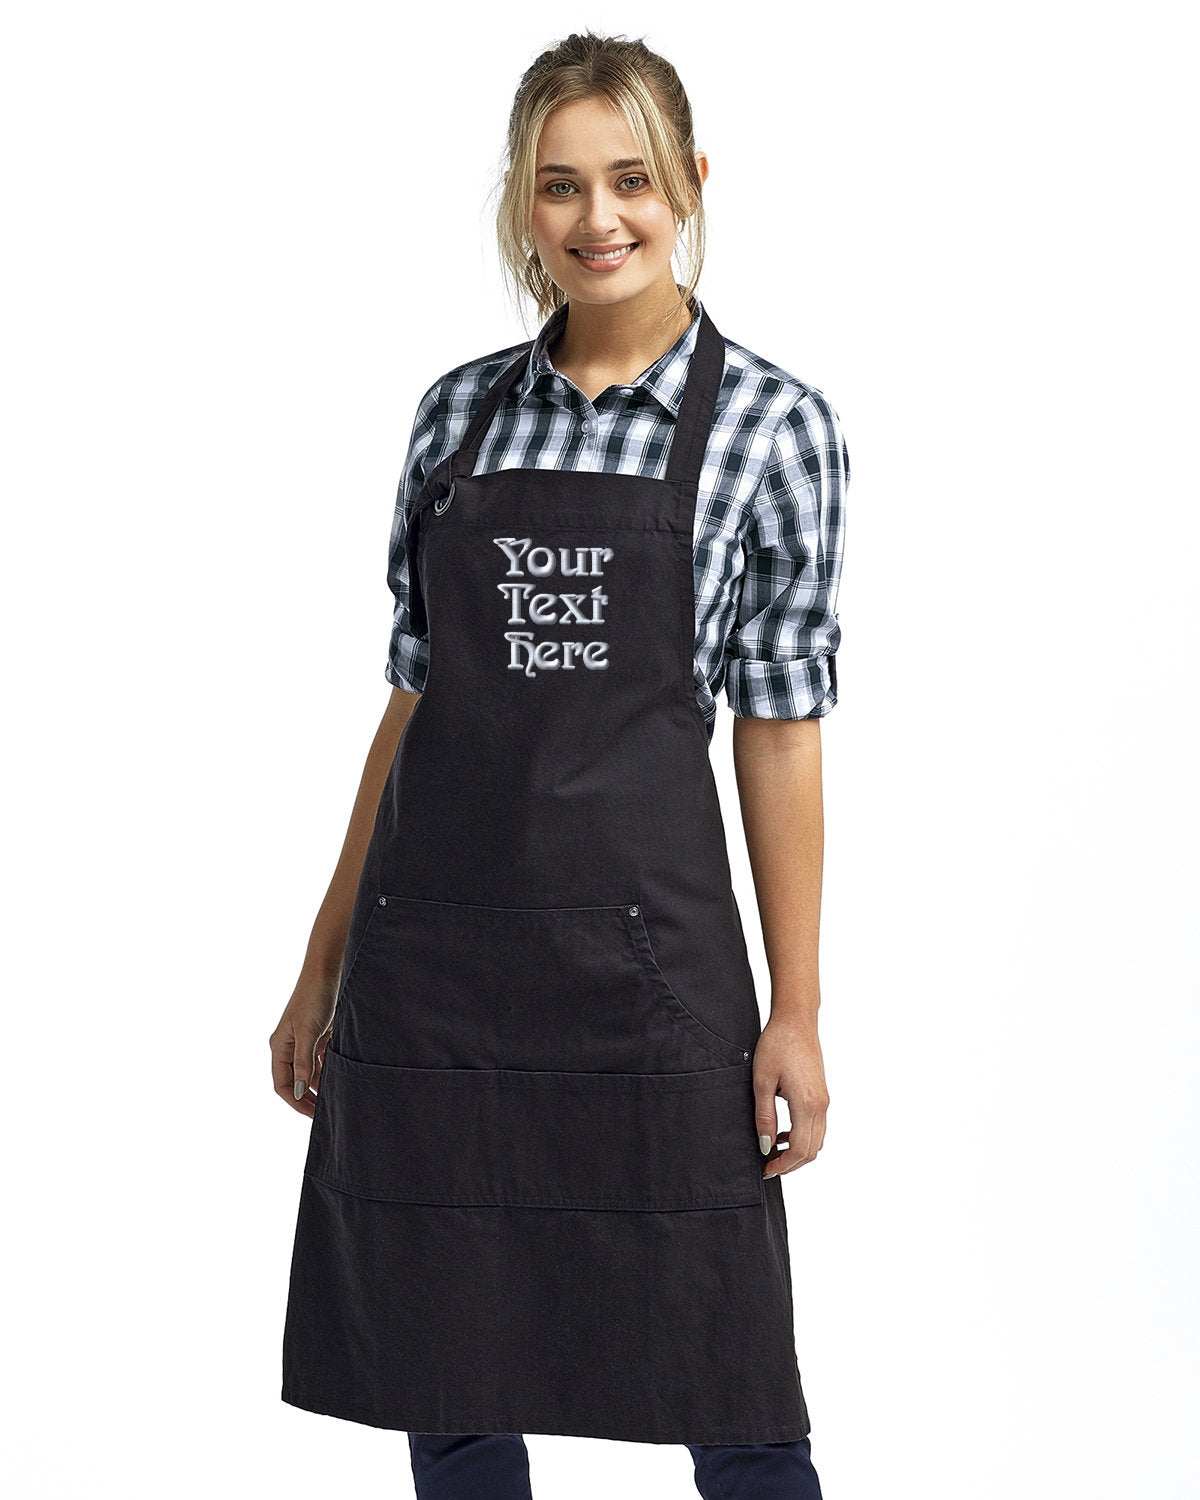 Unisex Pocket Apron Your Personalized Text Embroidered - 3 pack - black